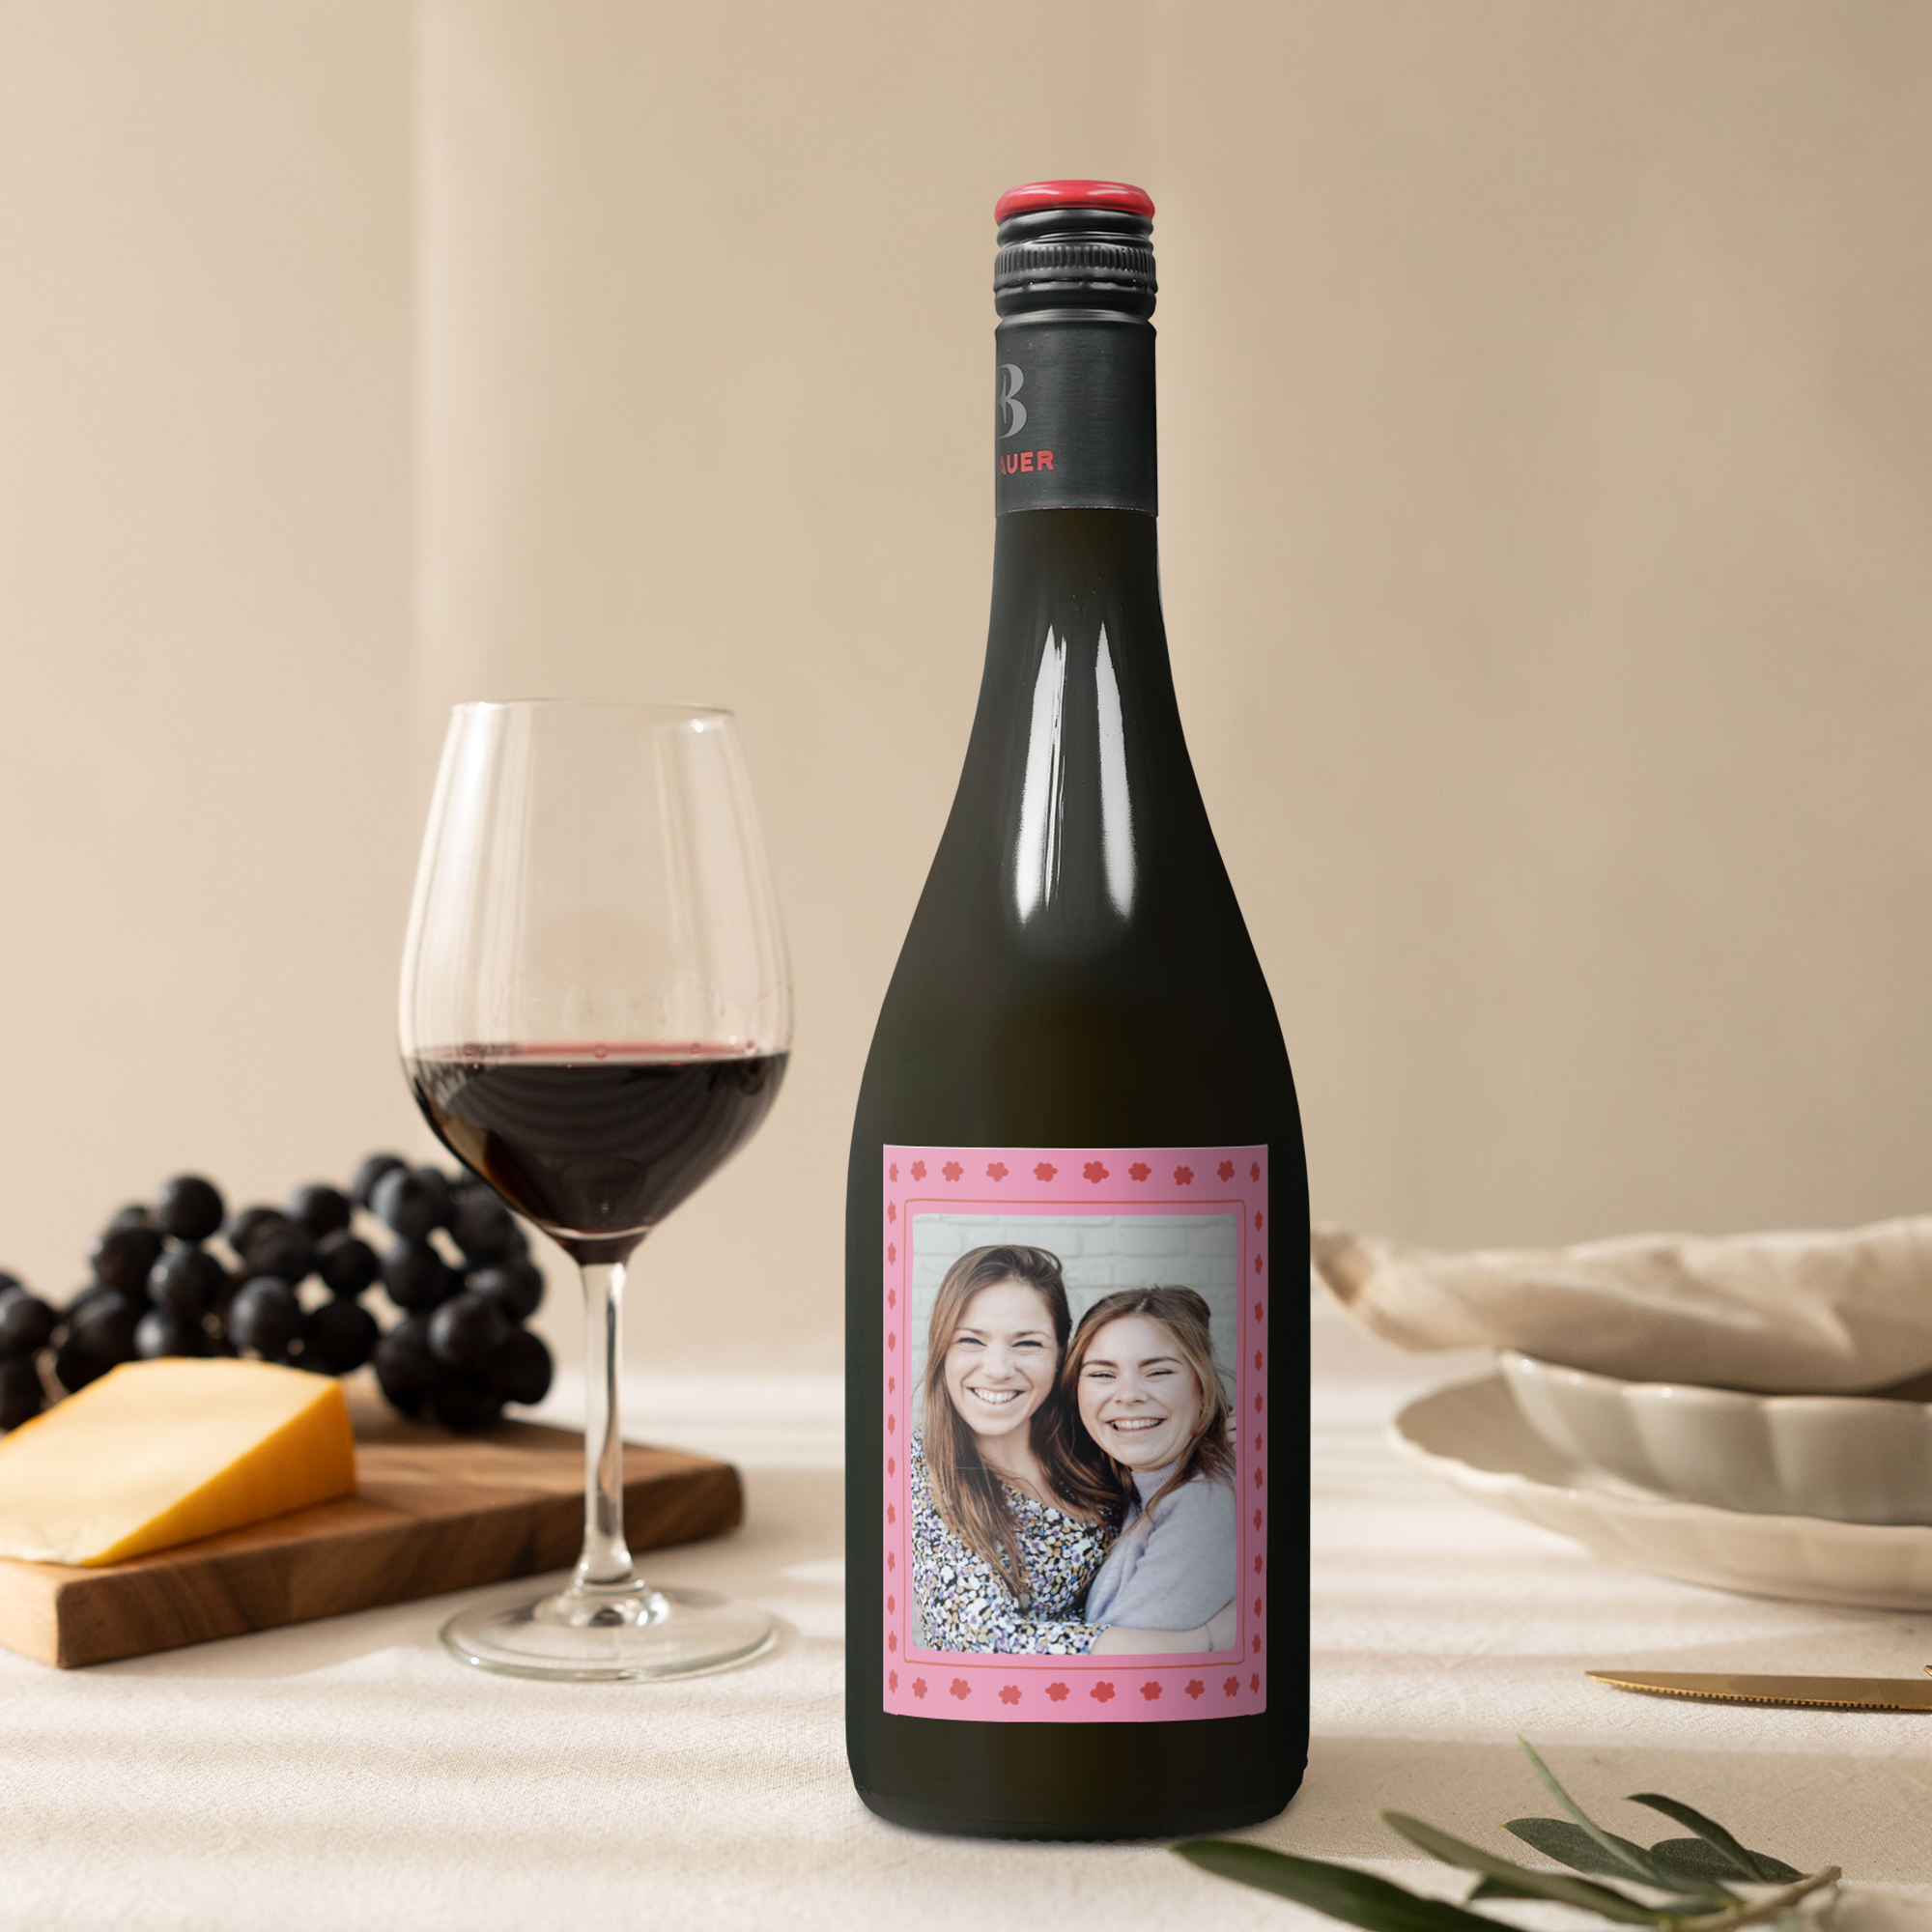 Wine with personalised label - Emil Bauer Spatburgunder